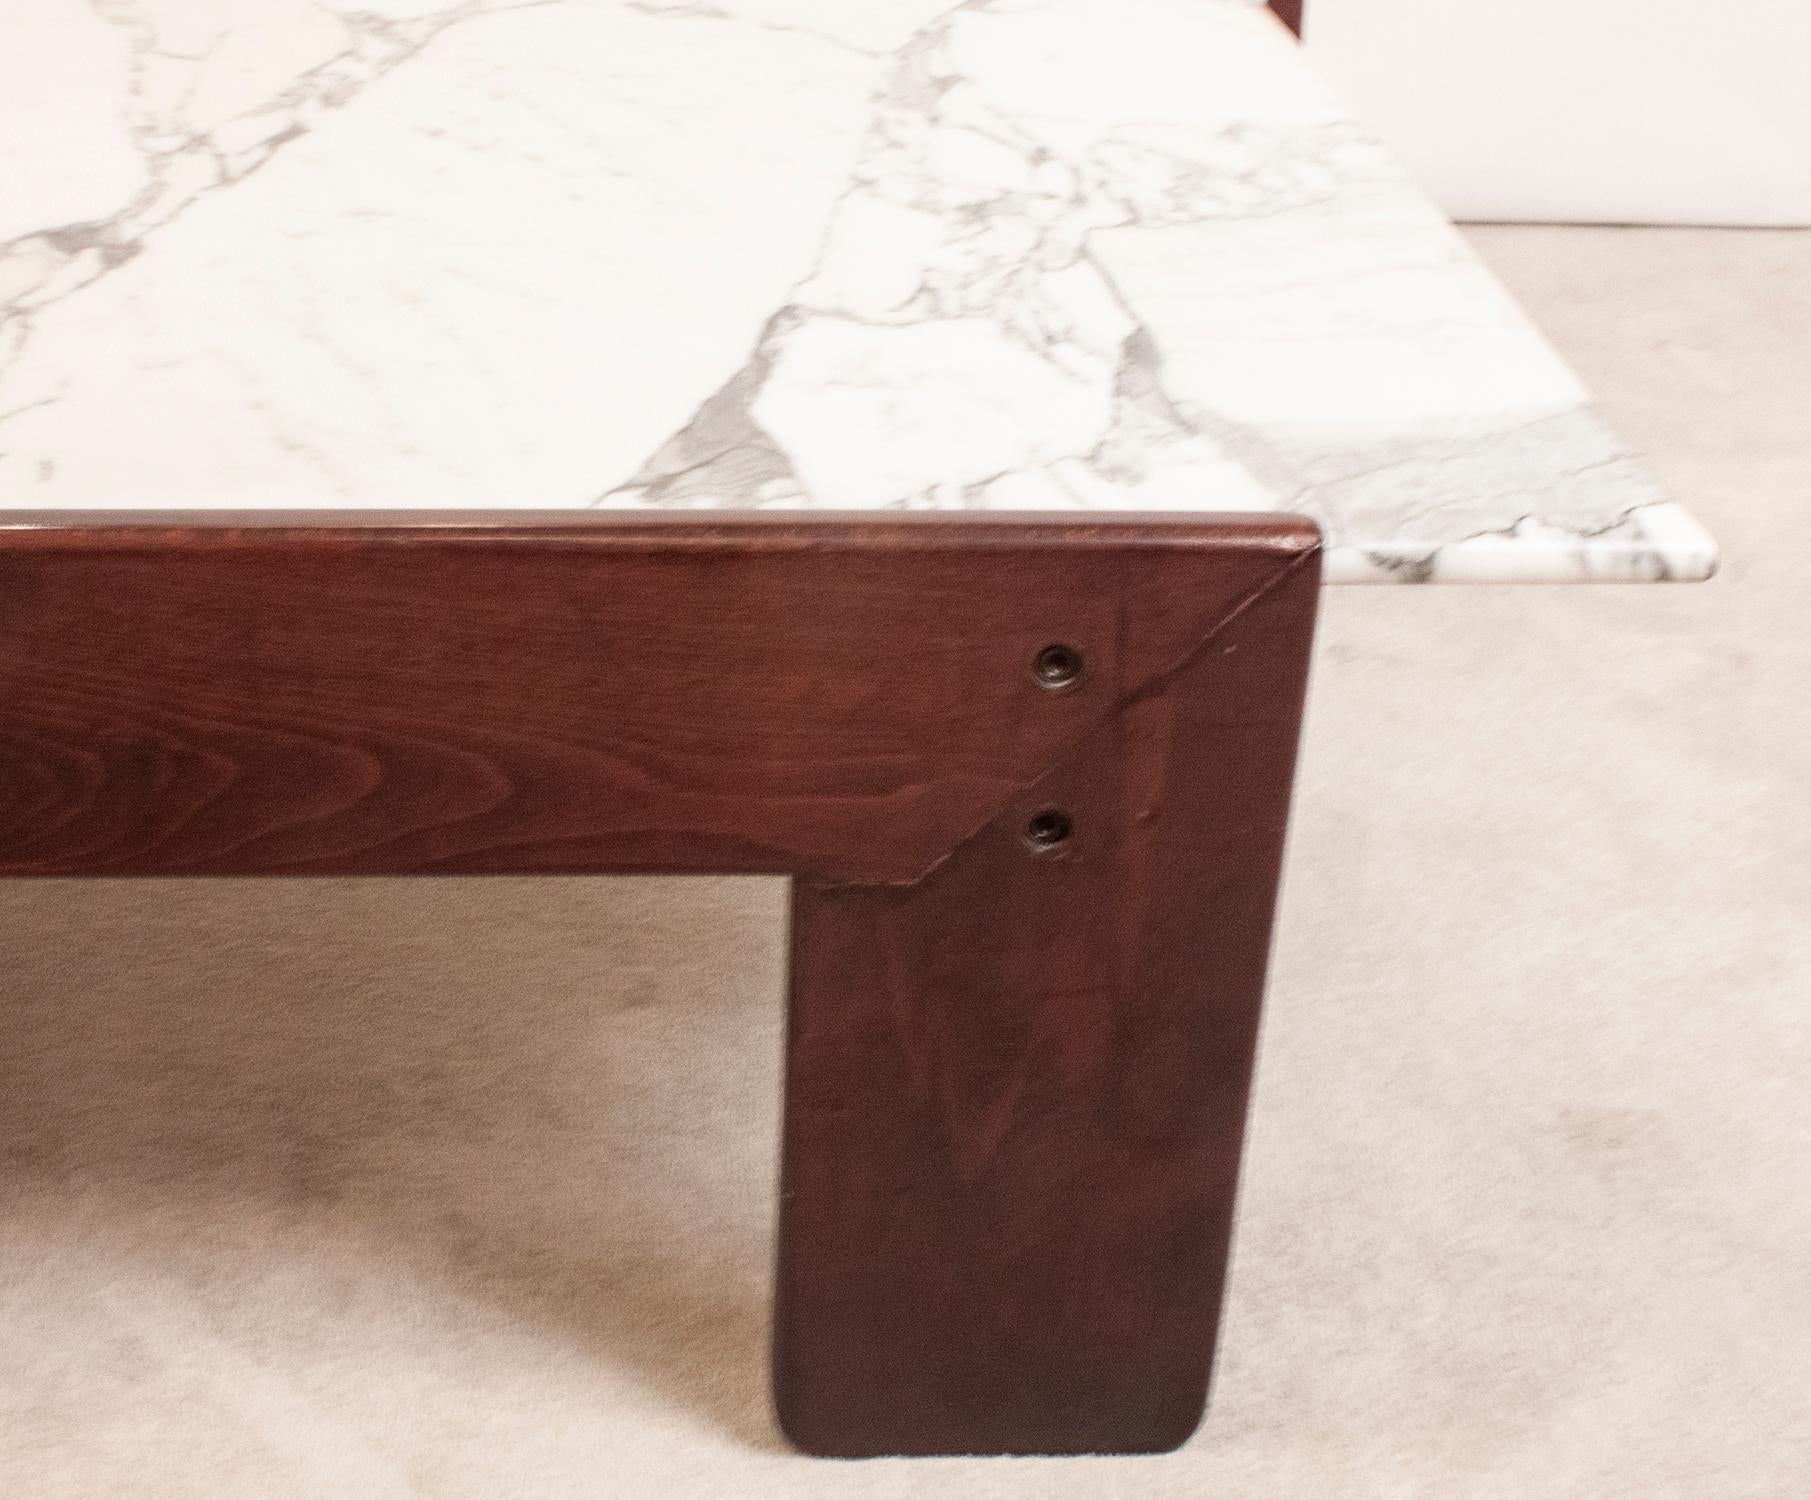 Late 20th Century Coffee Table, Wood and Marble Designed by Antonio Moragas, Spain, 1970's For Sale